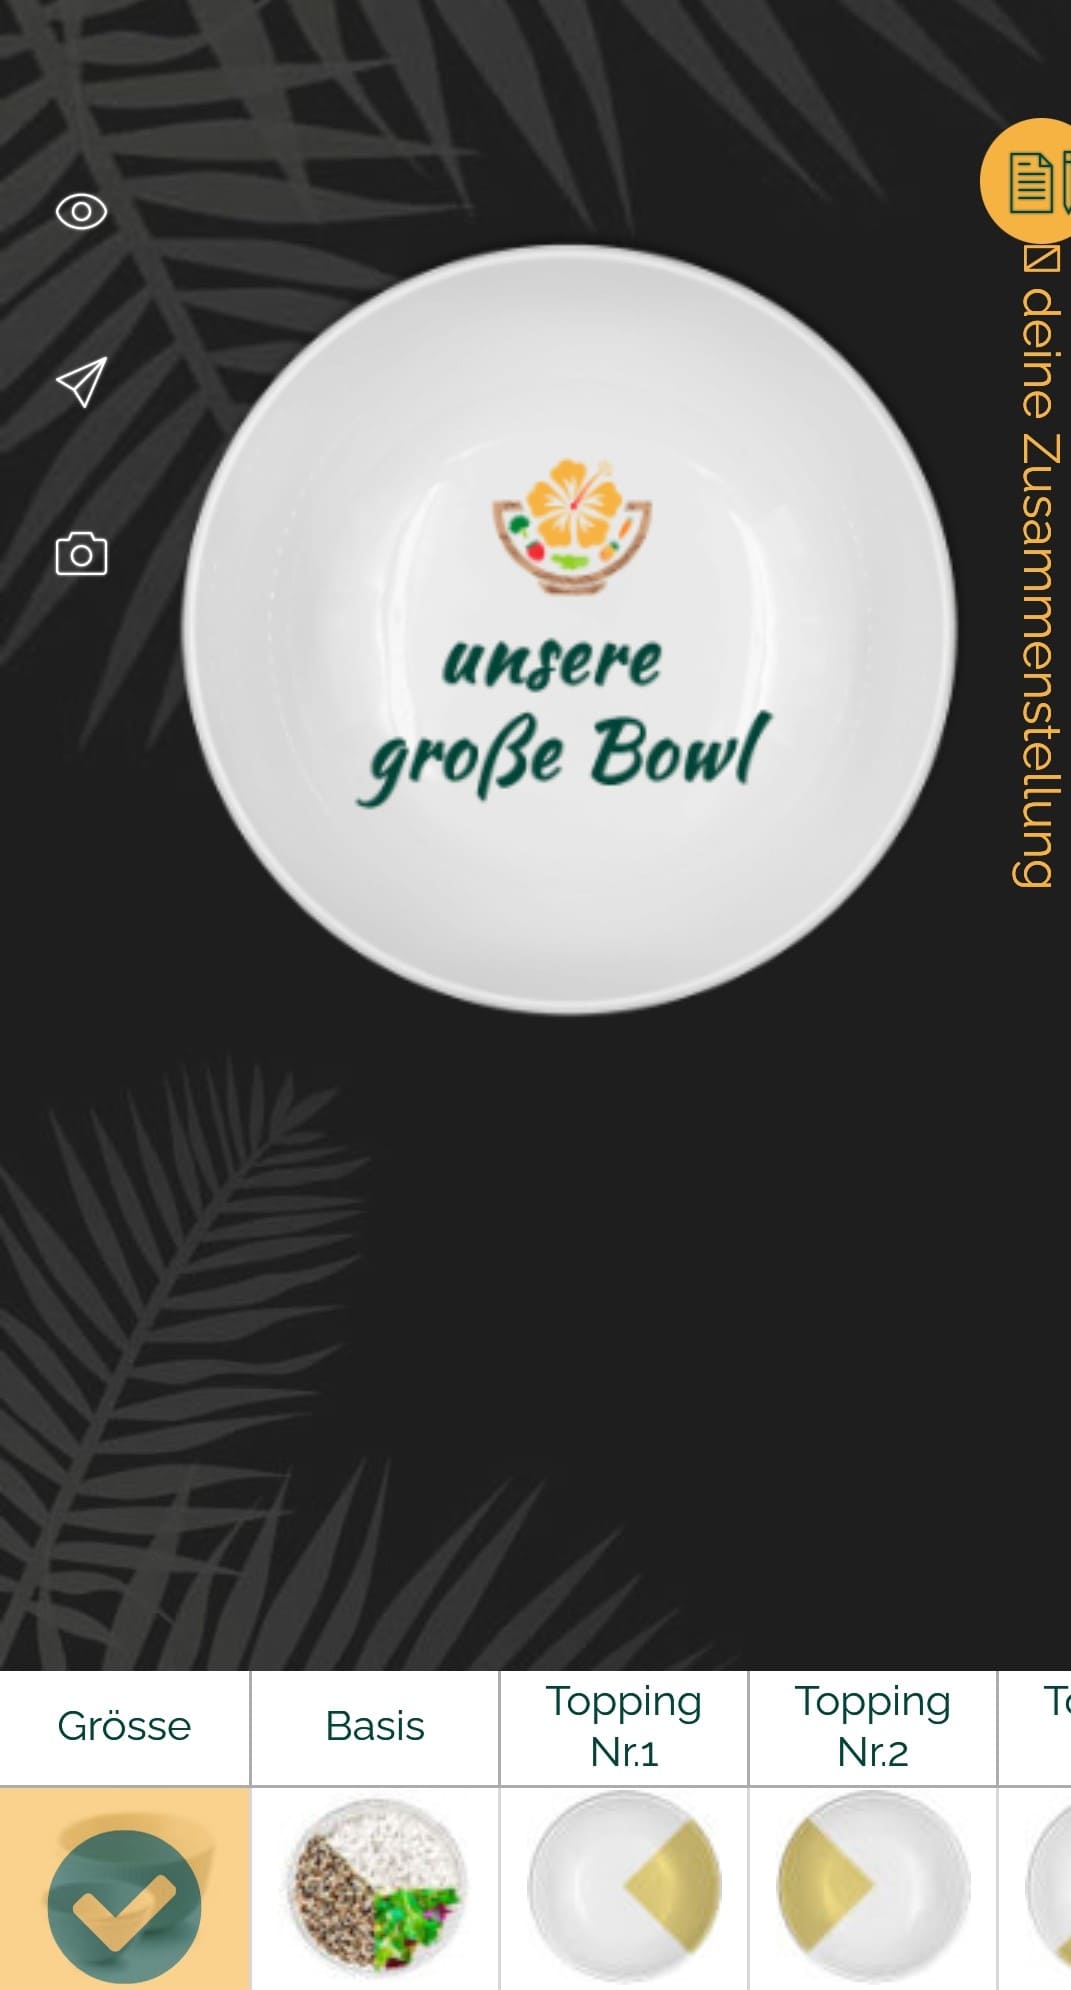 Pono Bowl - shareable own creation